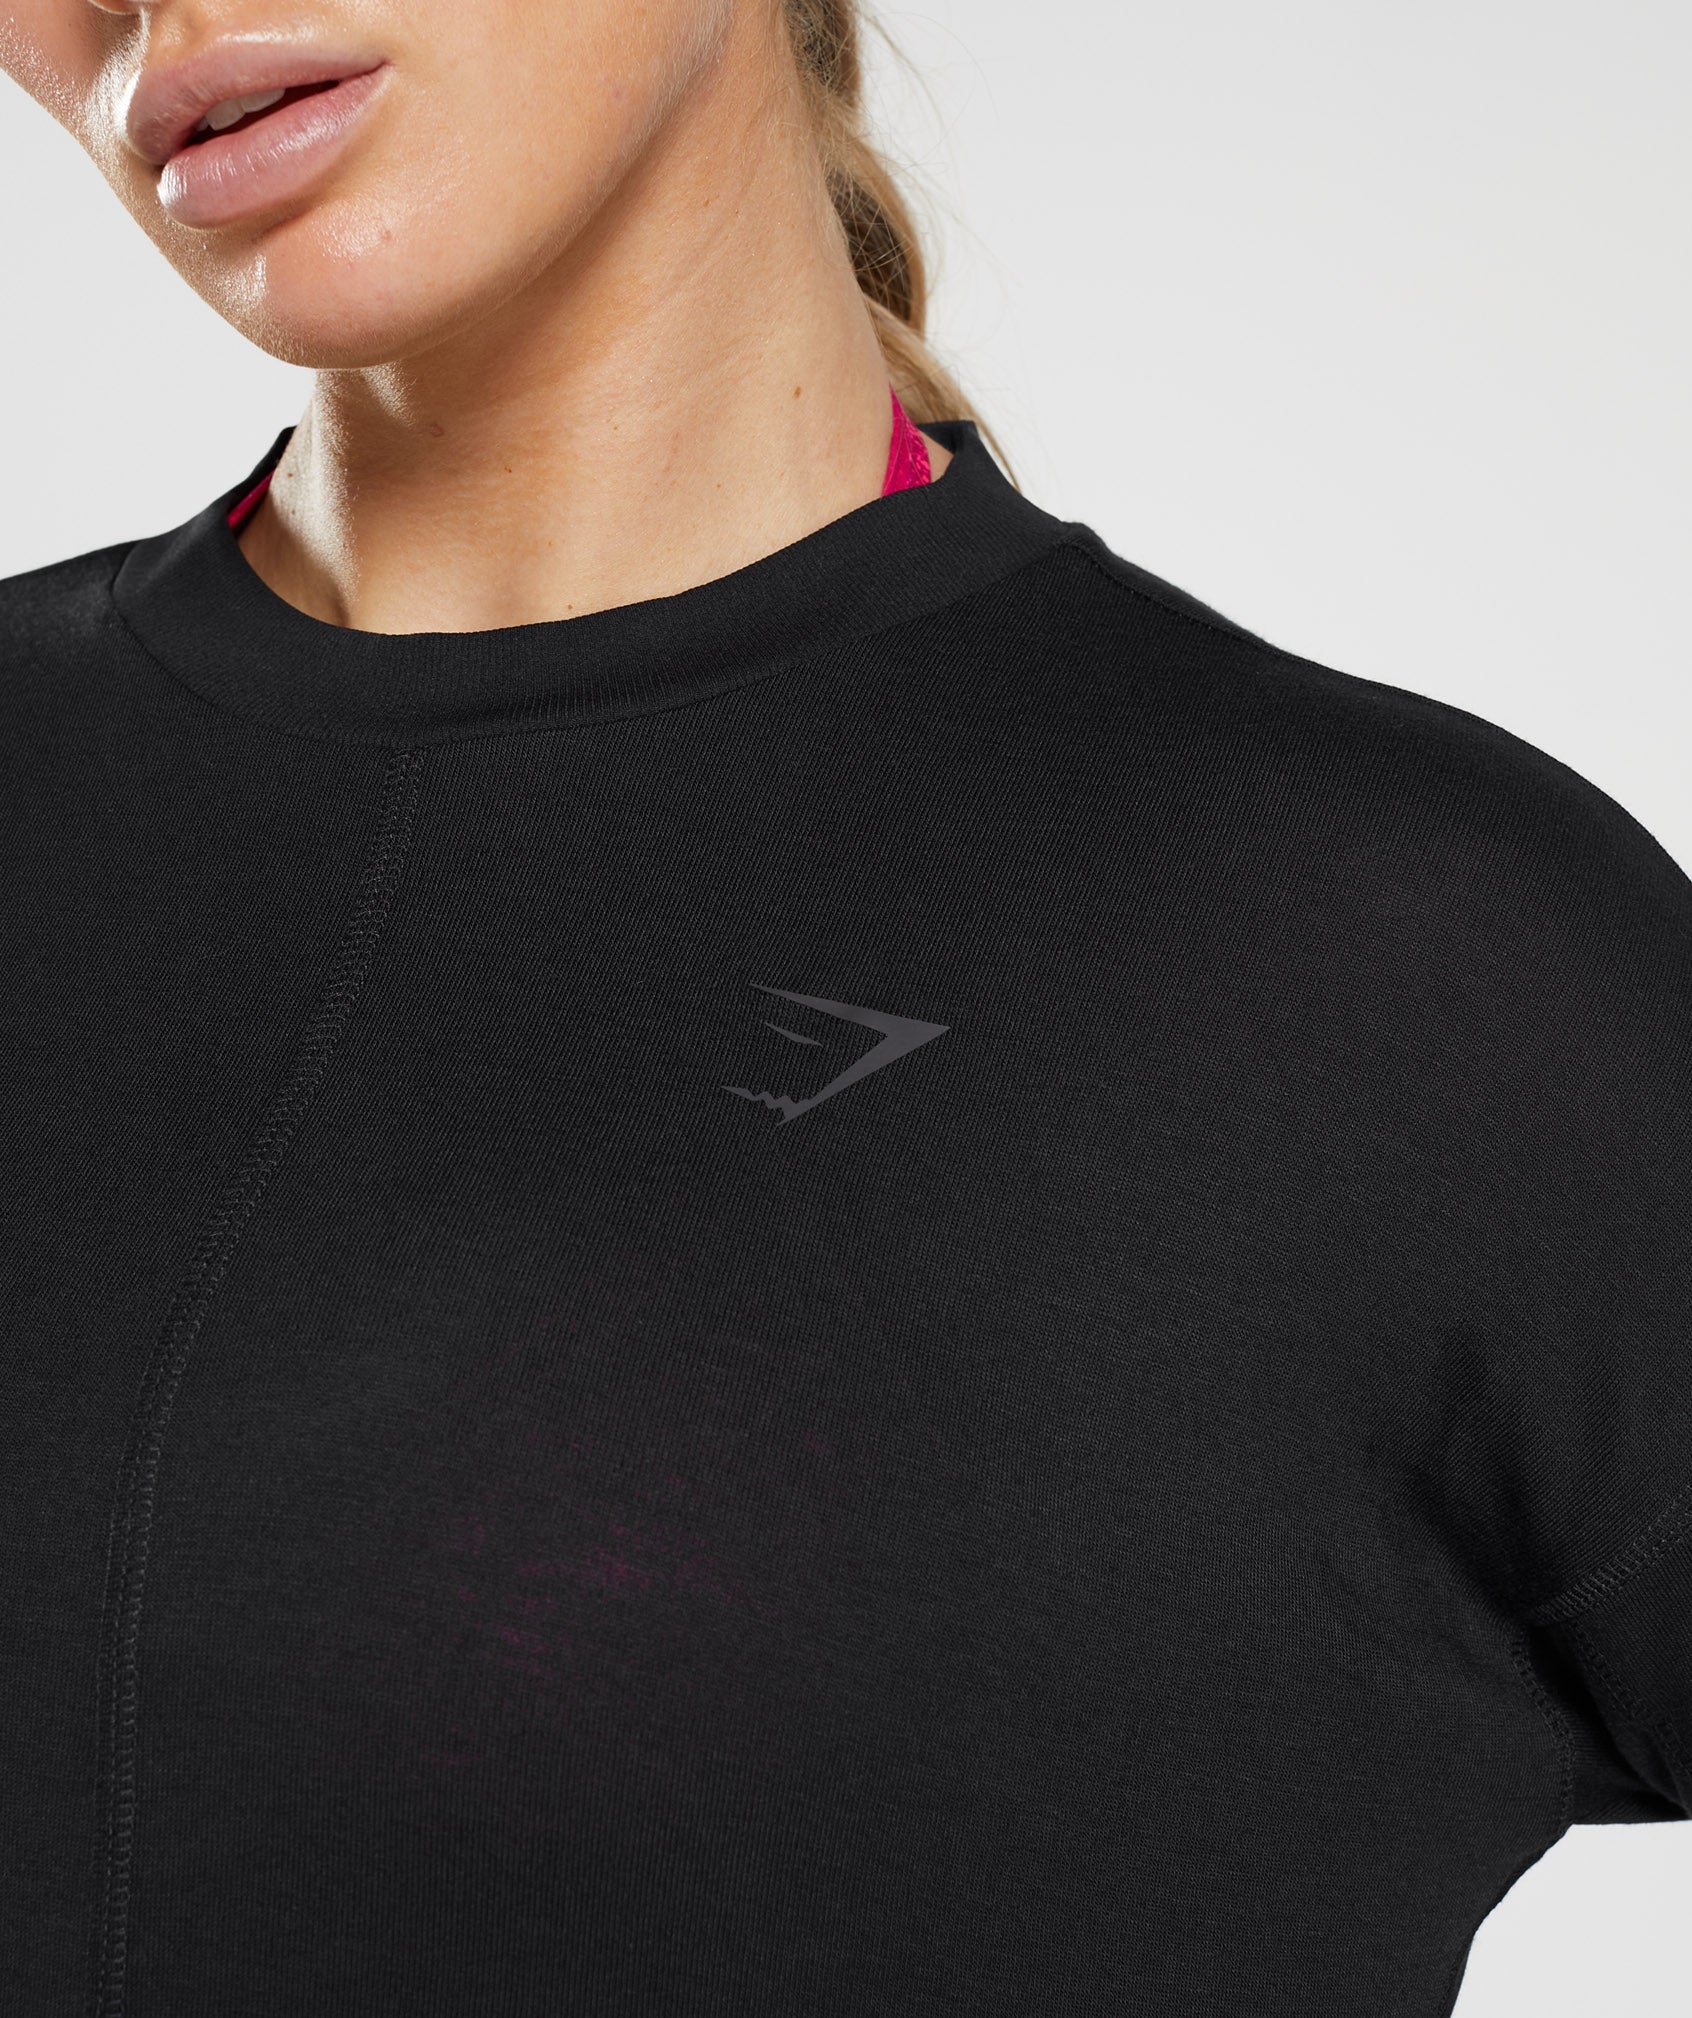 GS Power Long Sleeve T-Shirt in Black - view 3